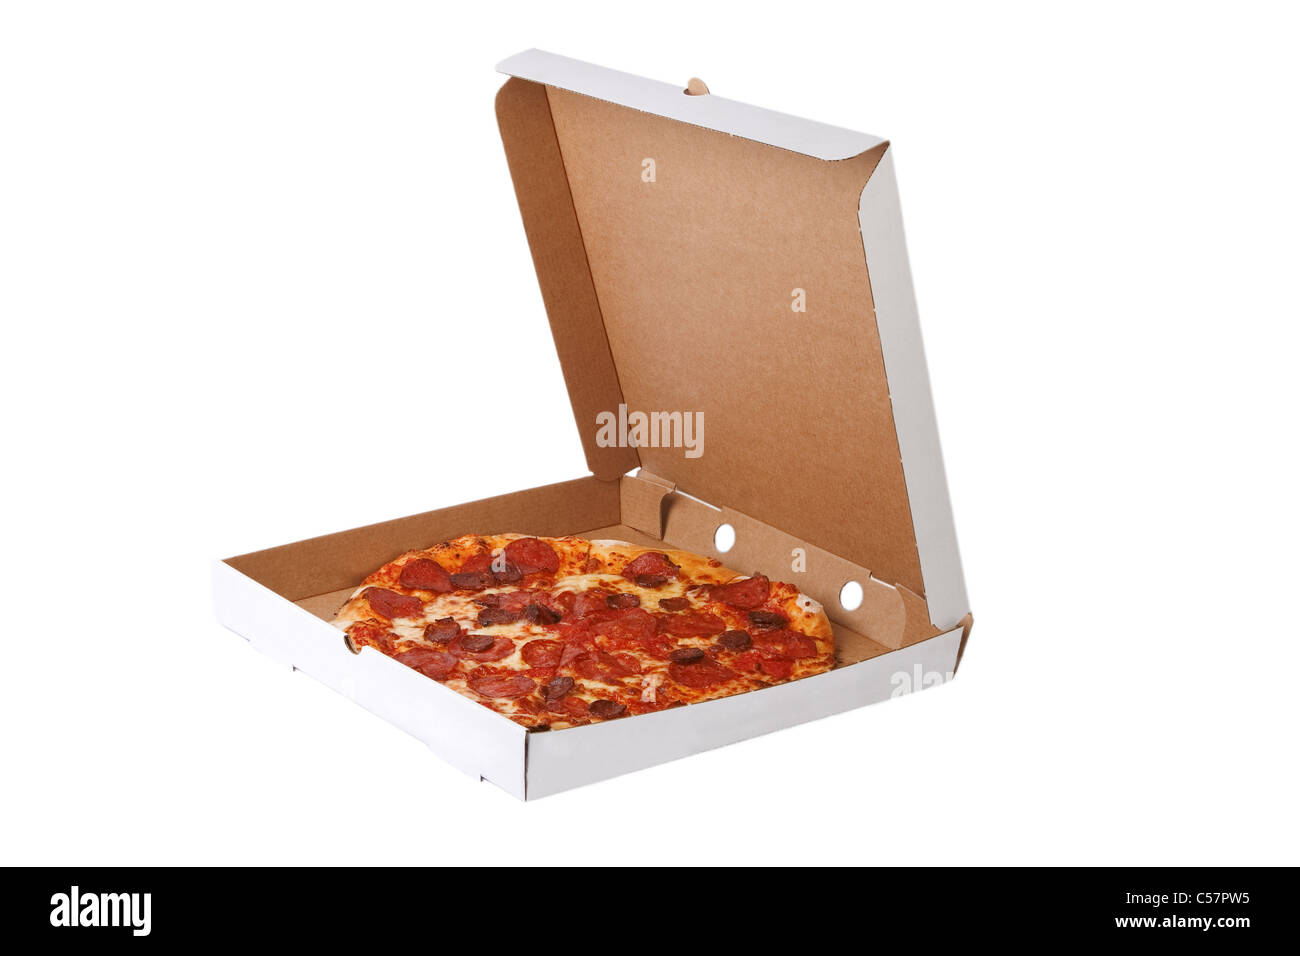 Fresh pizza in plain open box isolated on white background, Delivered fast food concept Stock Photo